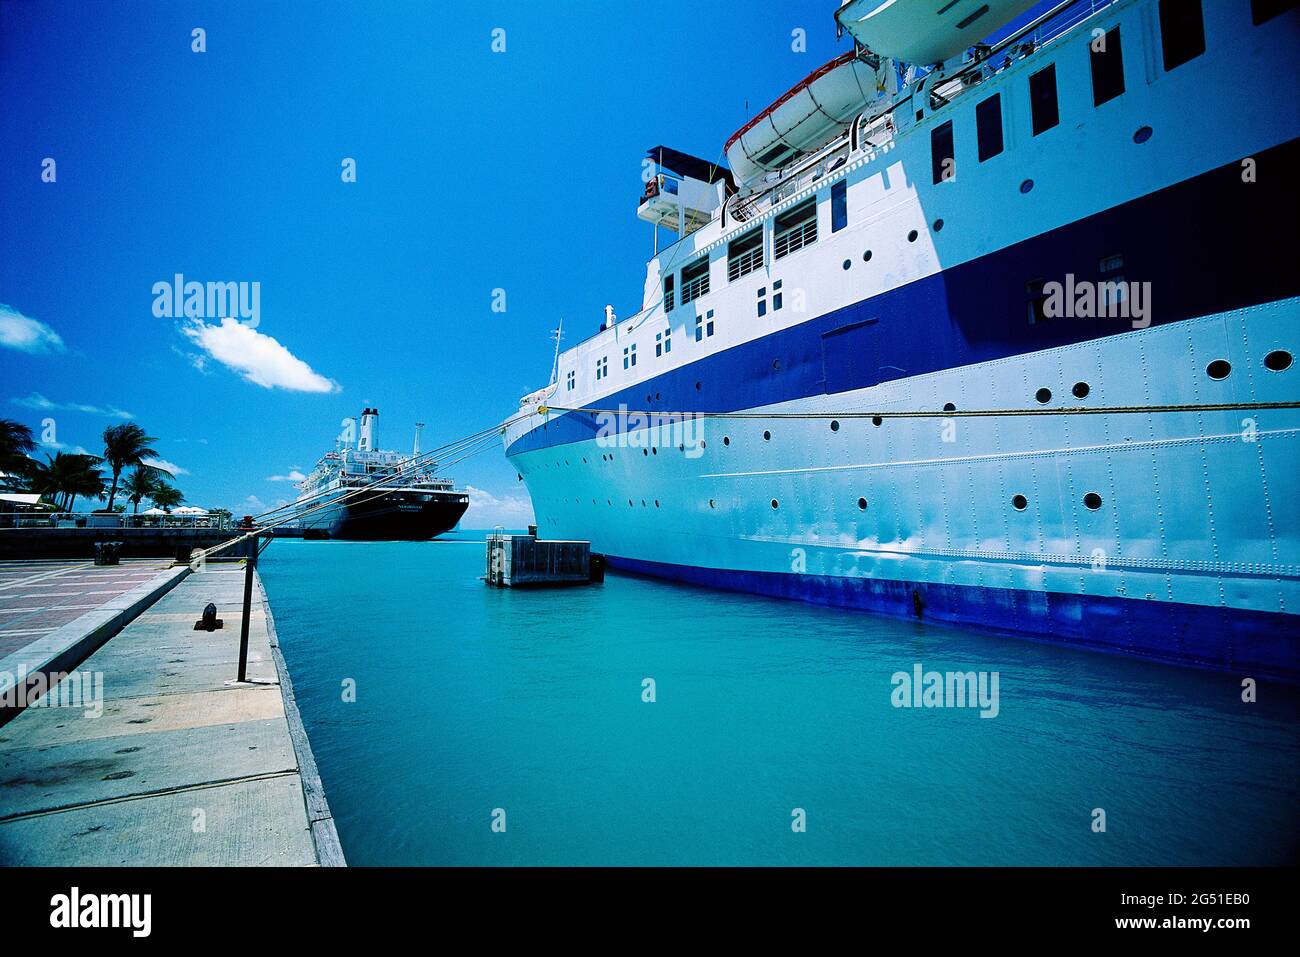 Cruise ship moored in dock, Key West, Florida, USA Stock Photo